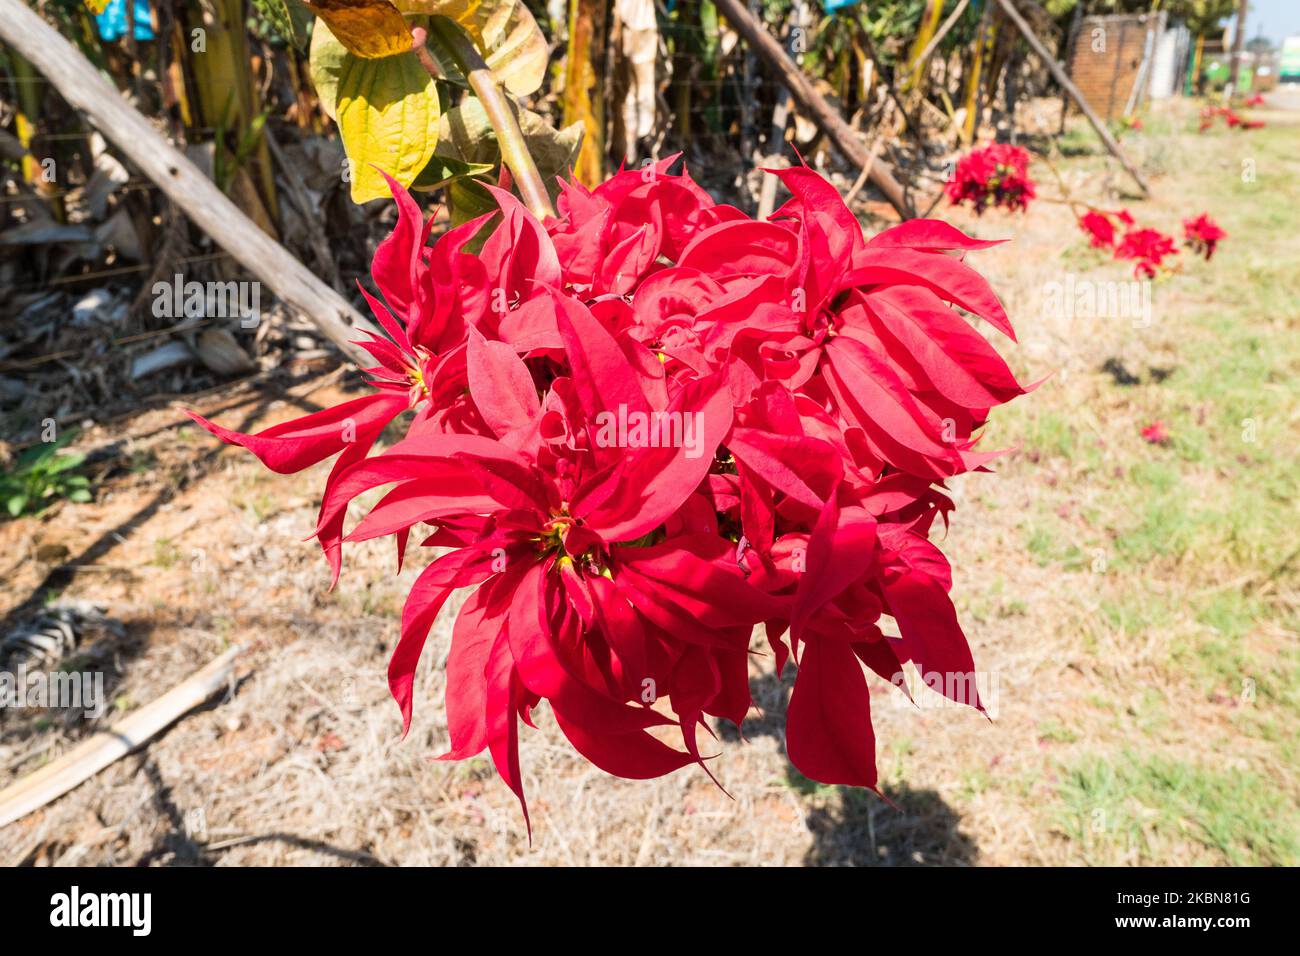 Poinsettia (Euphorbia pulcherrima) red or scarlet flower in full bloom closeup at a plantation or farm in Mpumalanga, South Africa Stock Photo